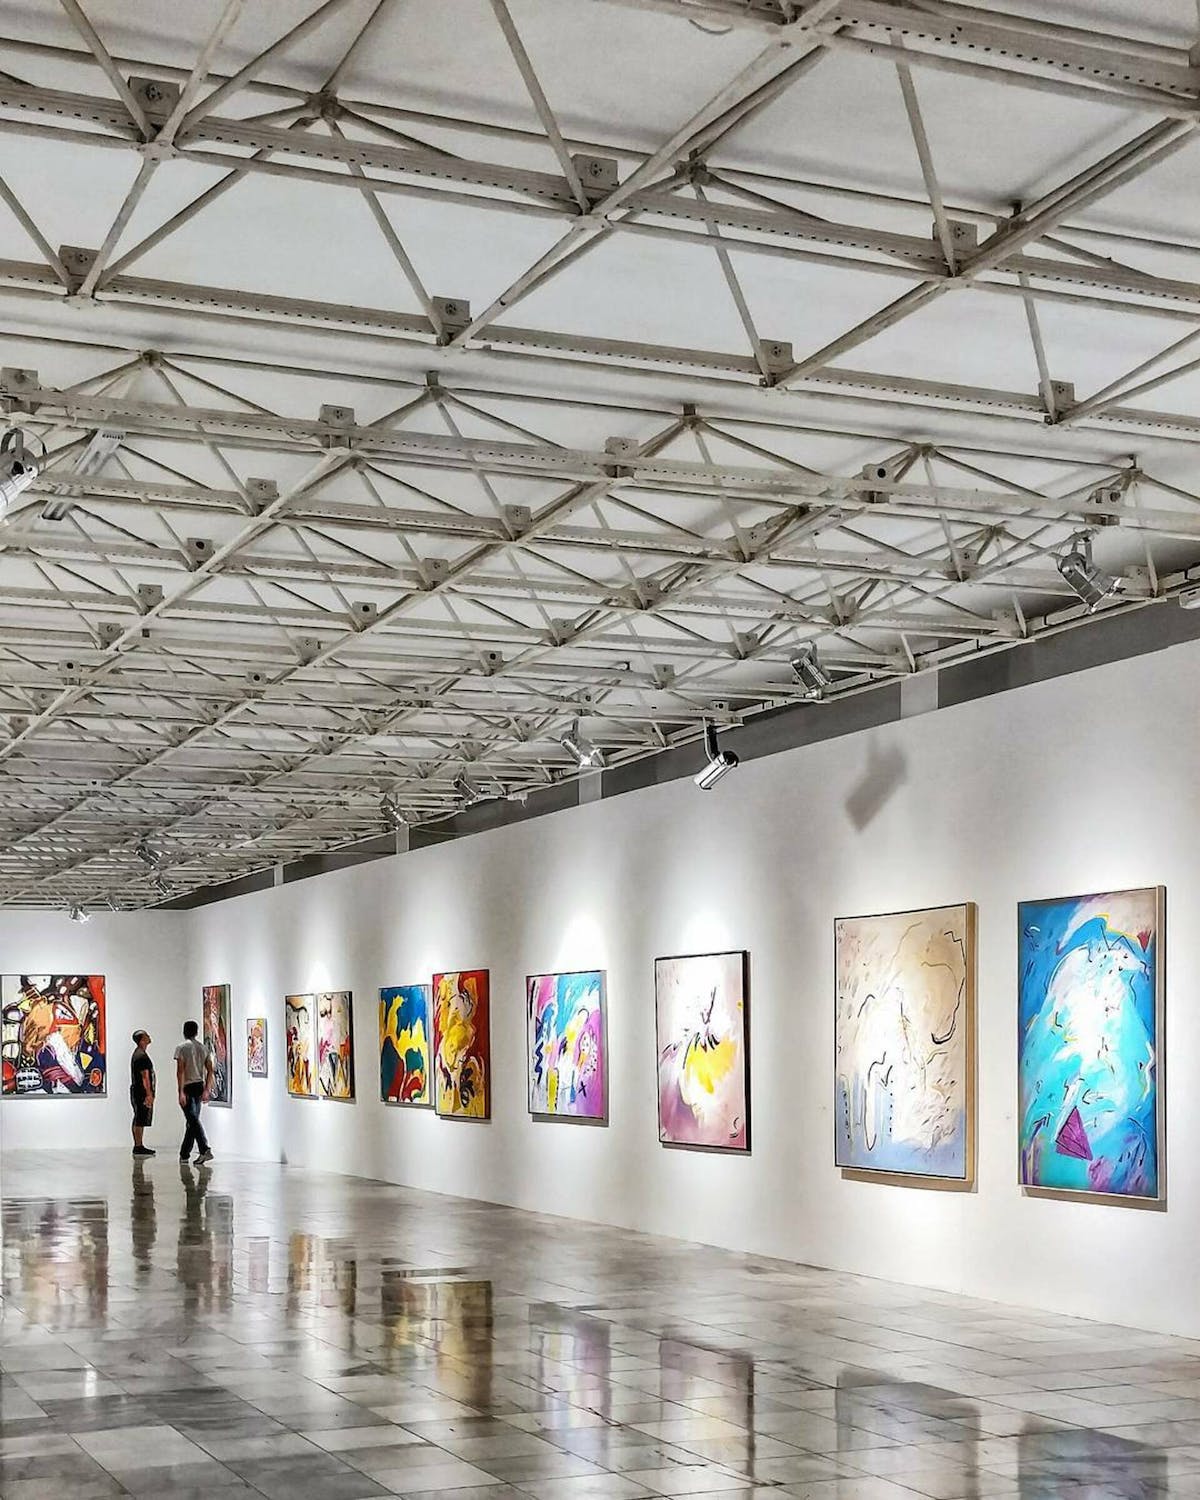 The Ultimate Guide: How to Start an Art Gallery from Scratch